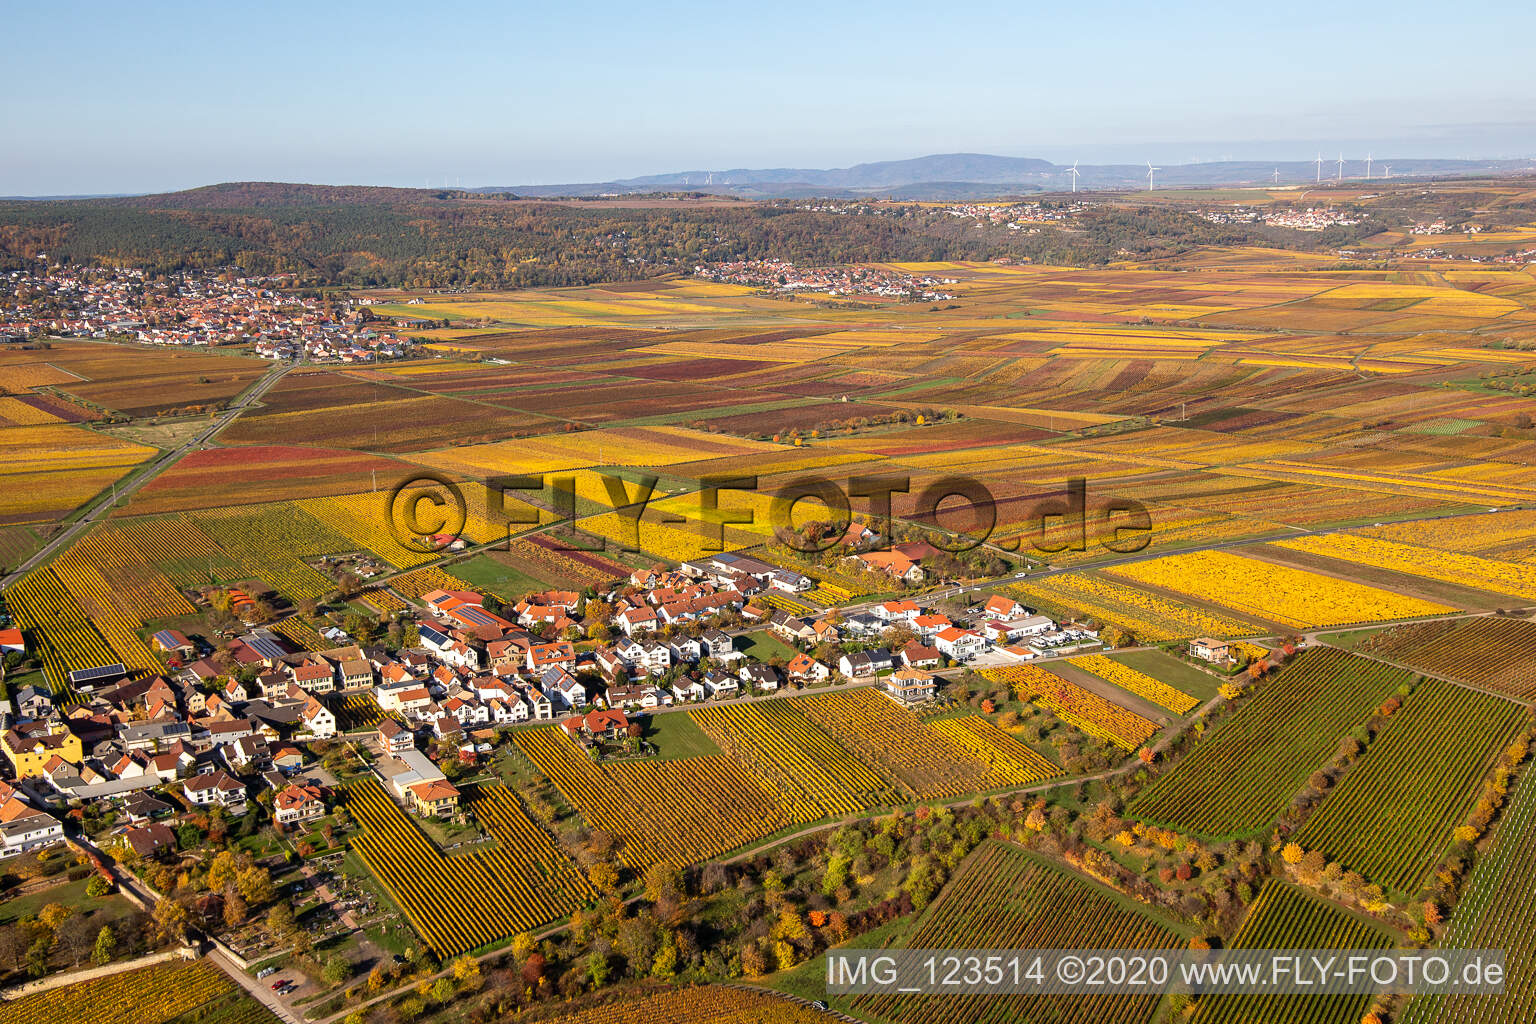 Oblique view of Herxheim am Berg in the state Rhineland-Palatinate, Germany